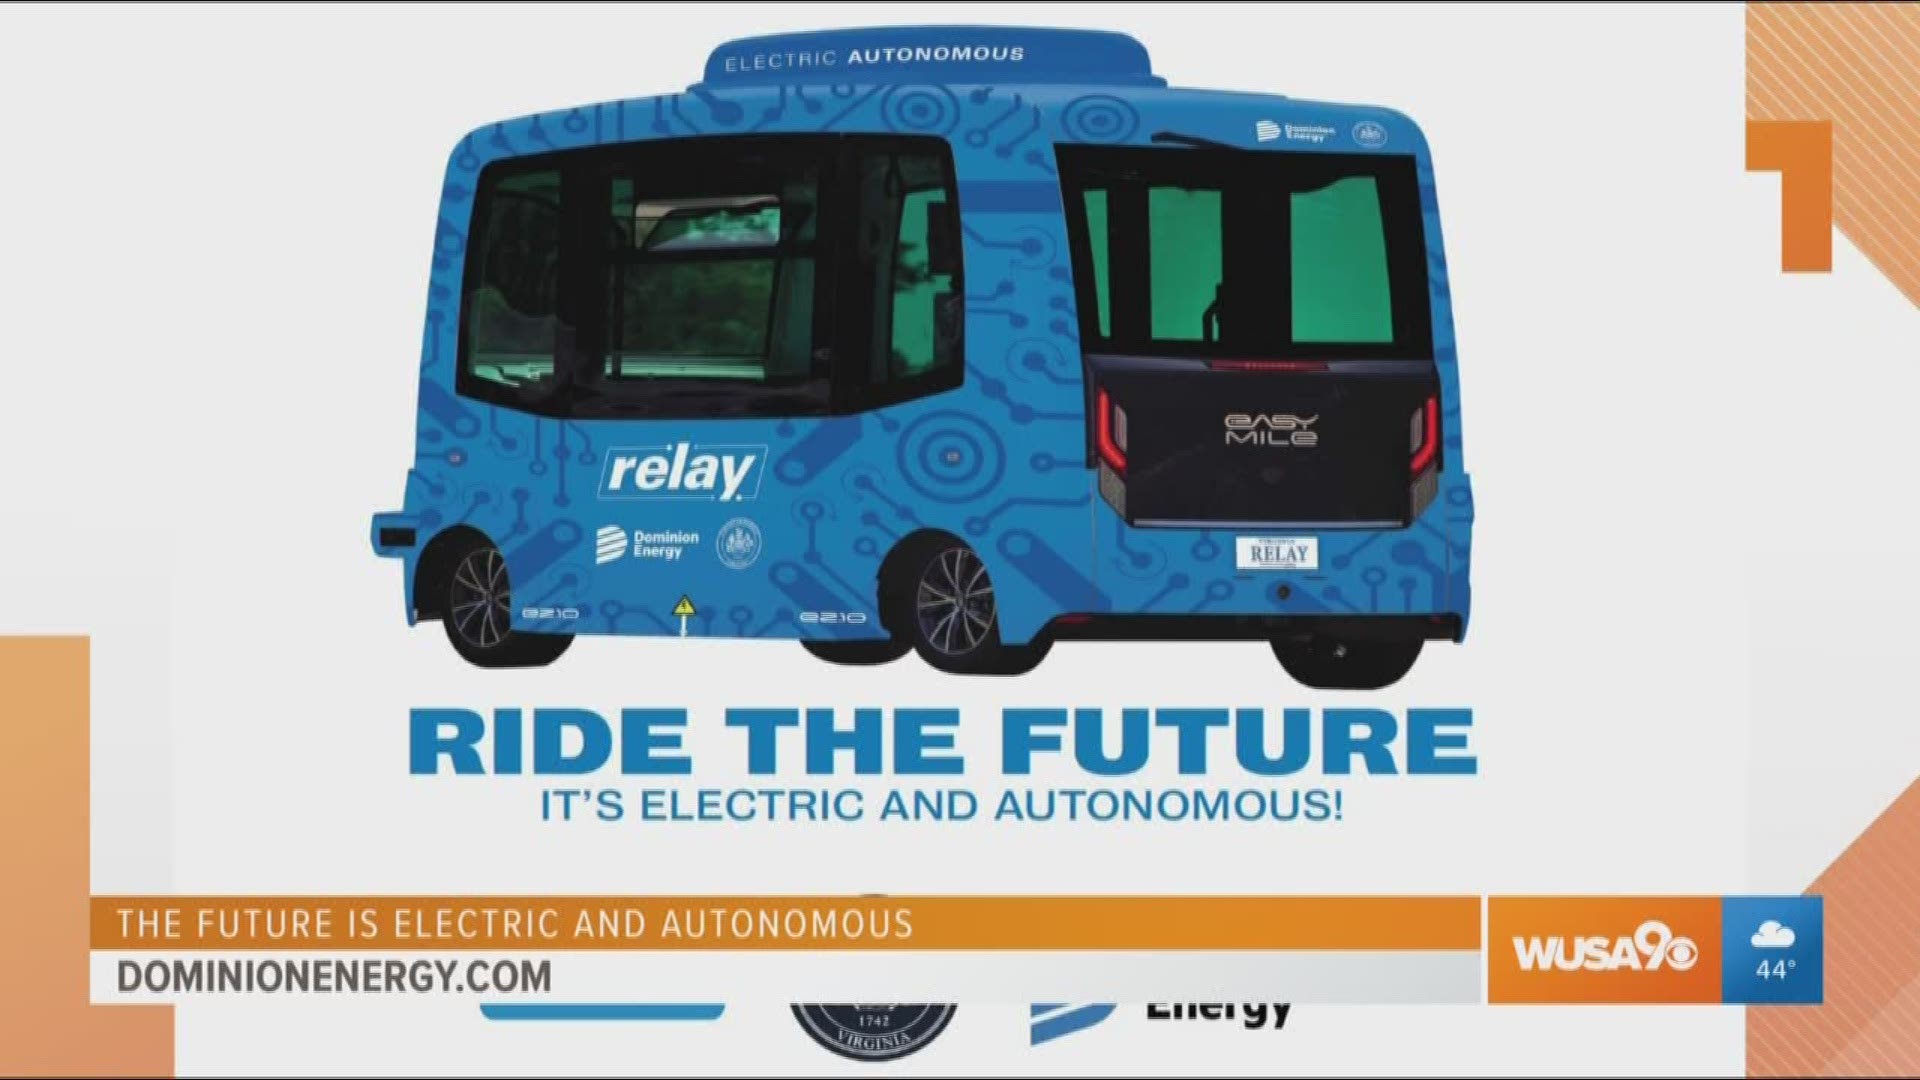 Soon, you’ll be able to ride an electric, autonomous shuttle in Fairfax County called Relay!  Sponsored by Dominion Energy.